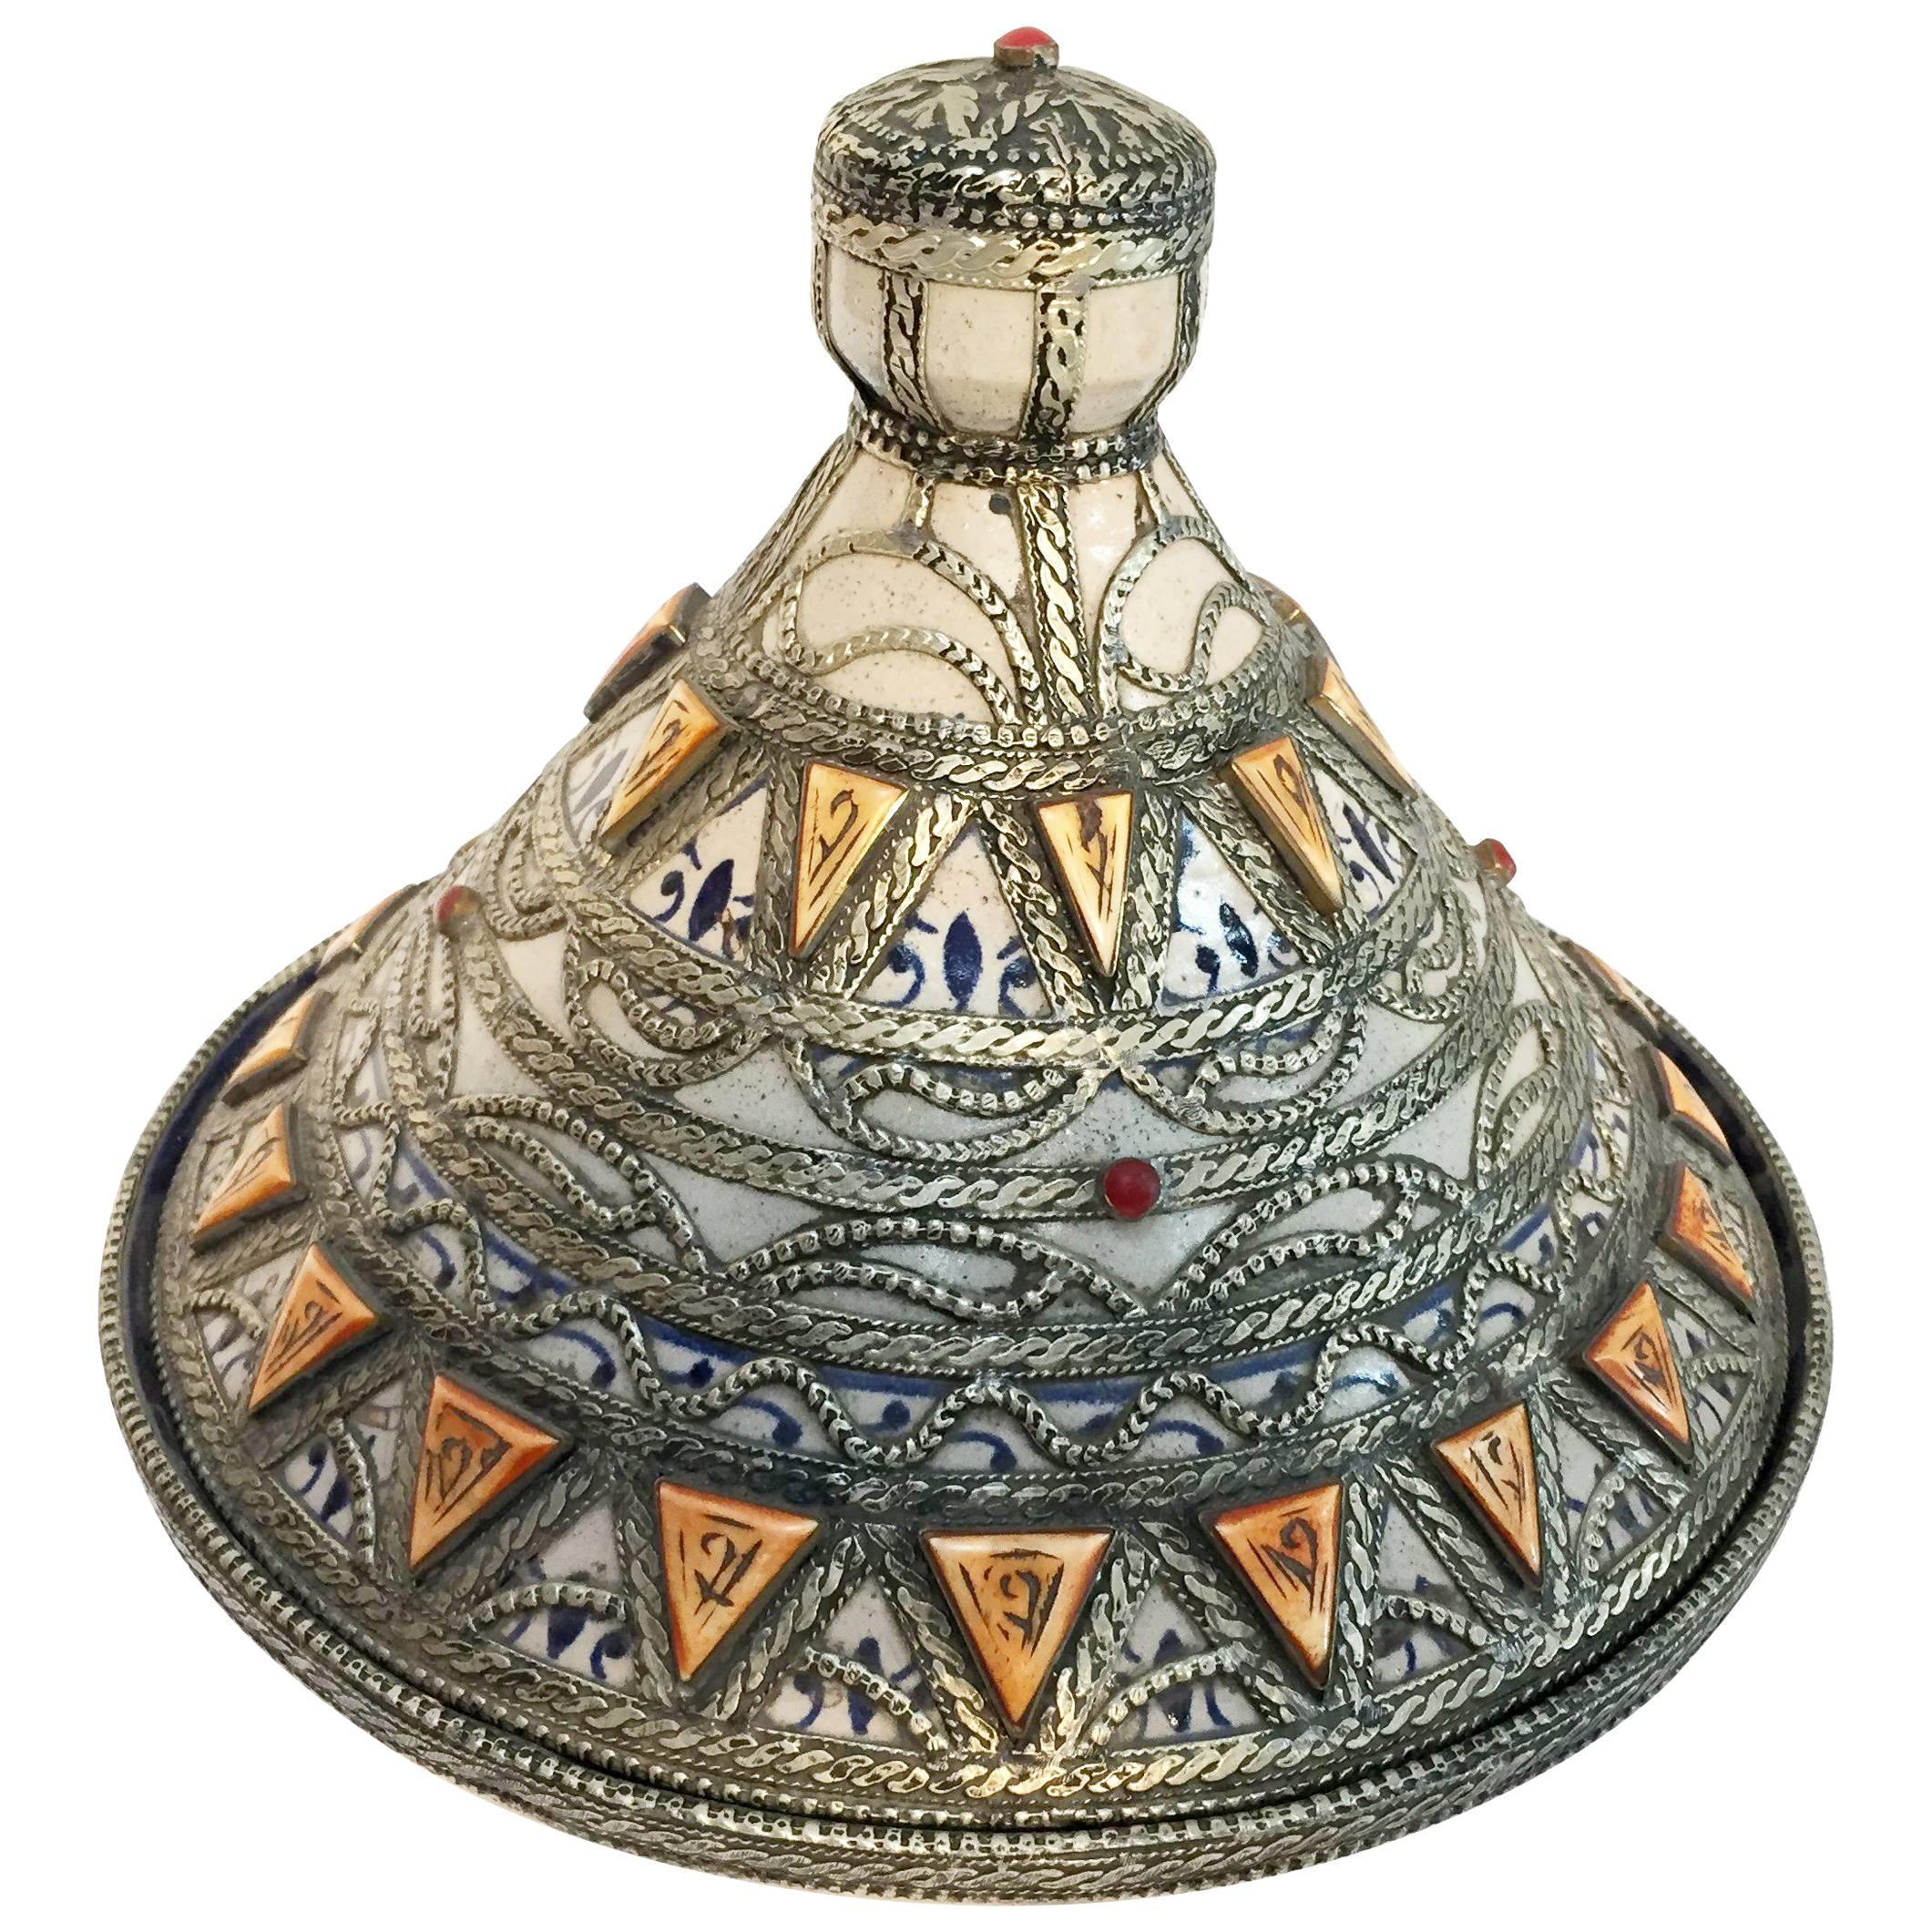 Moroccan Ceramic Polychrome Tajine with Leather Stones and Metal Overlay